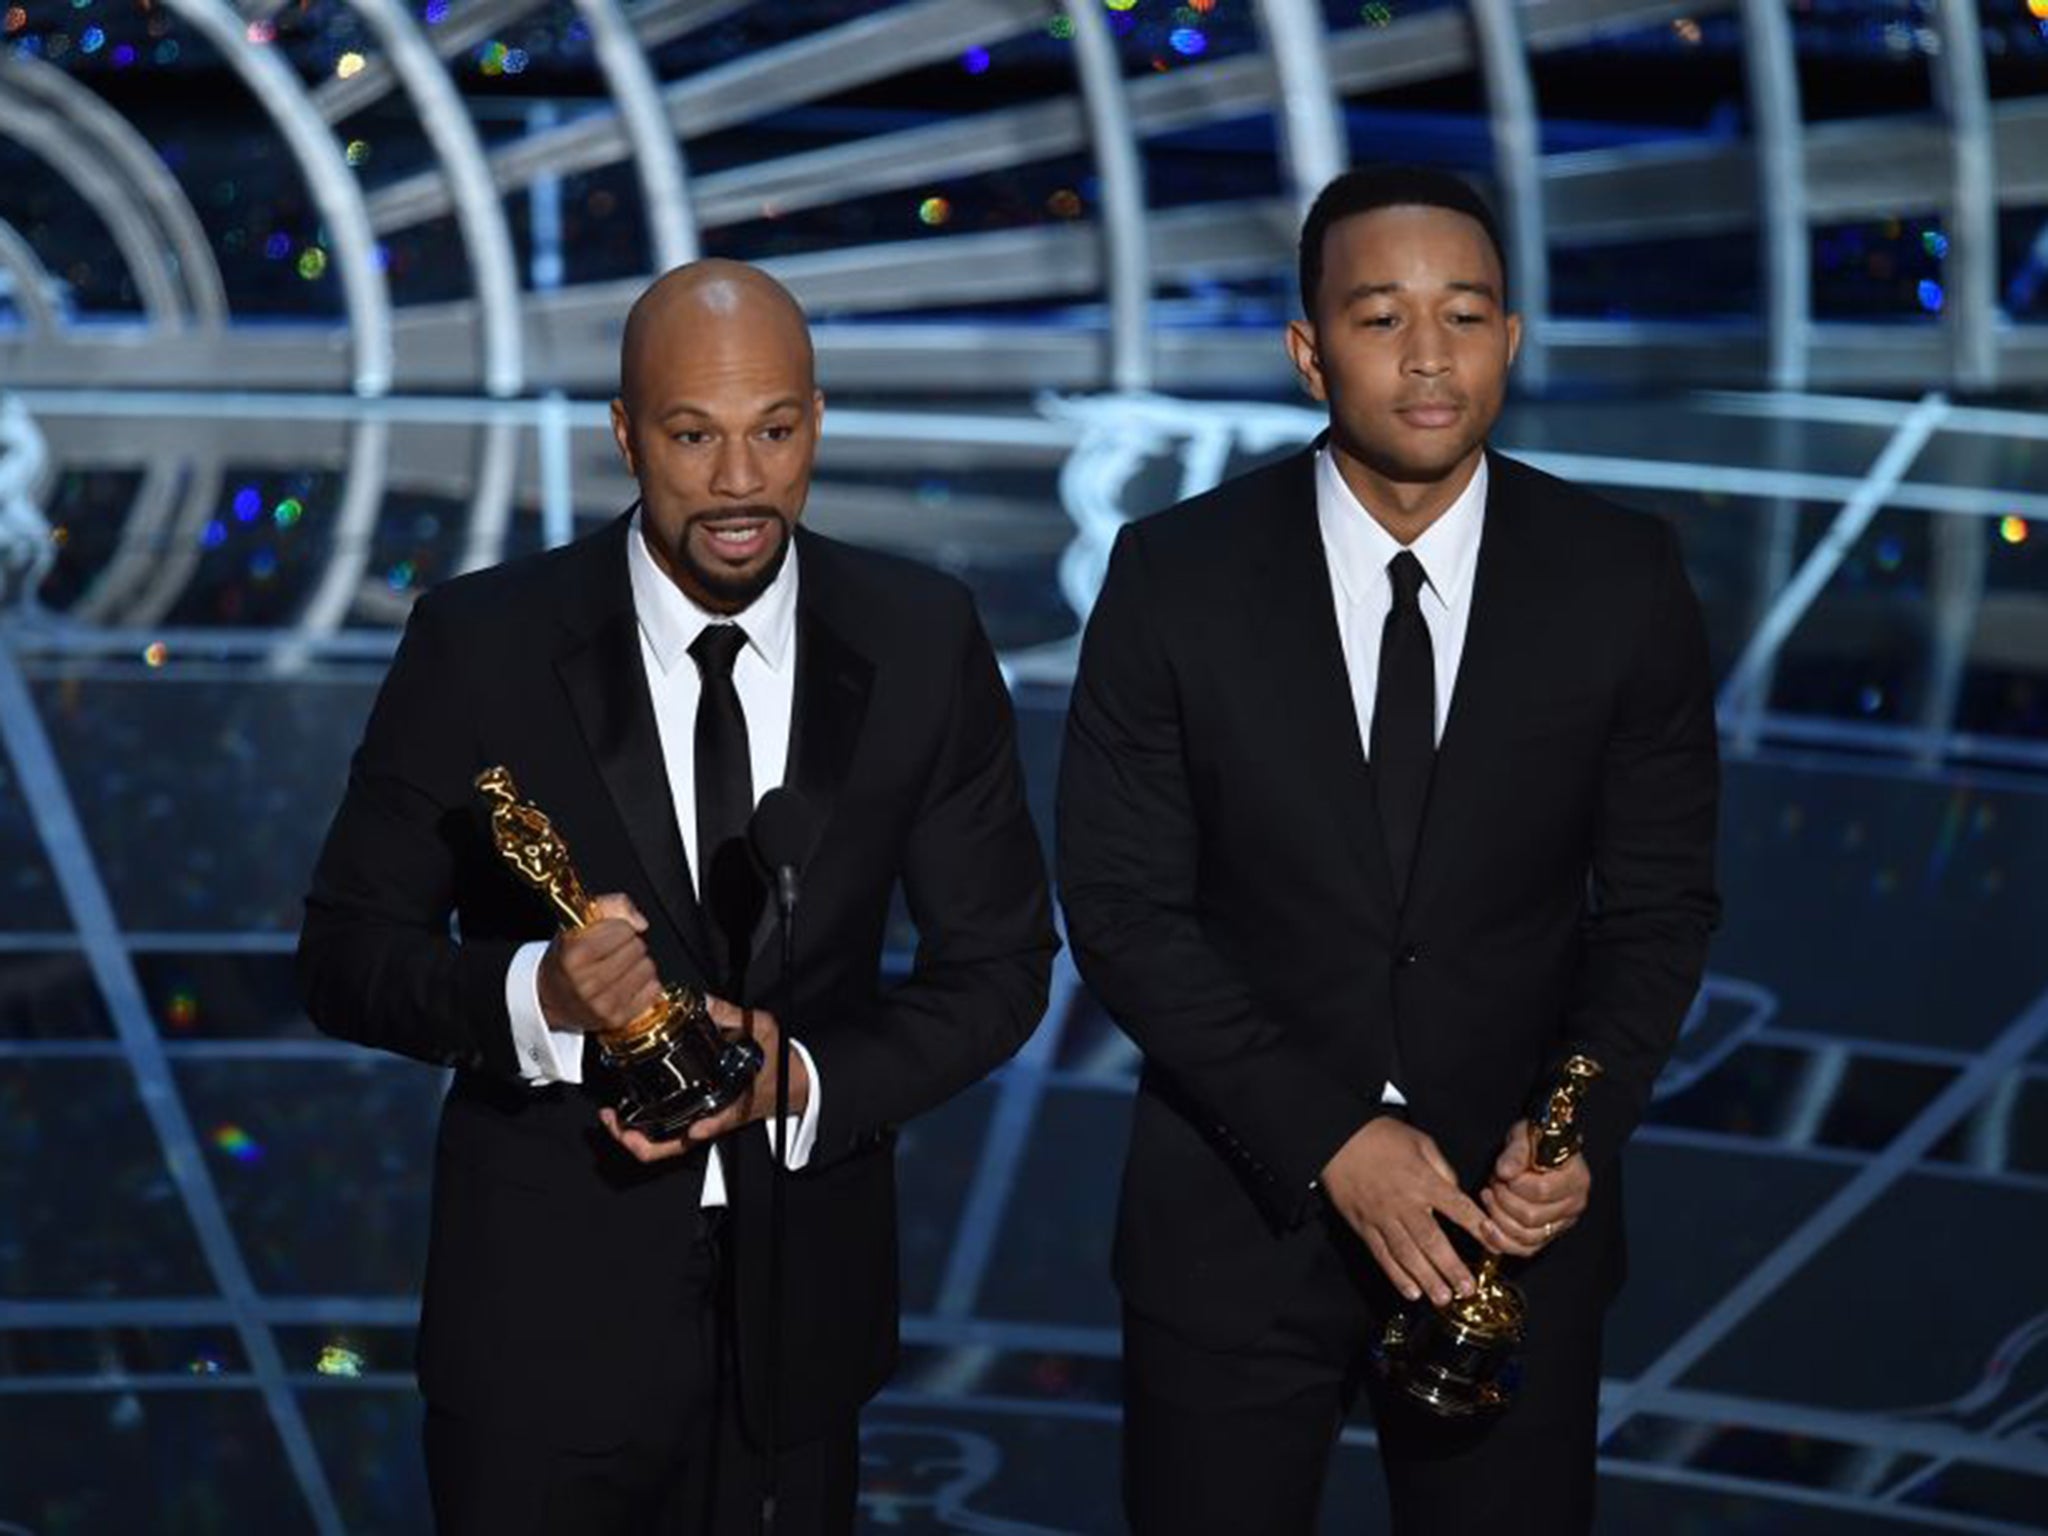 Common and John Legend’s ‘Glory’ won the award for Best Original Song